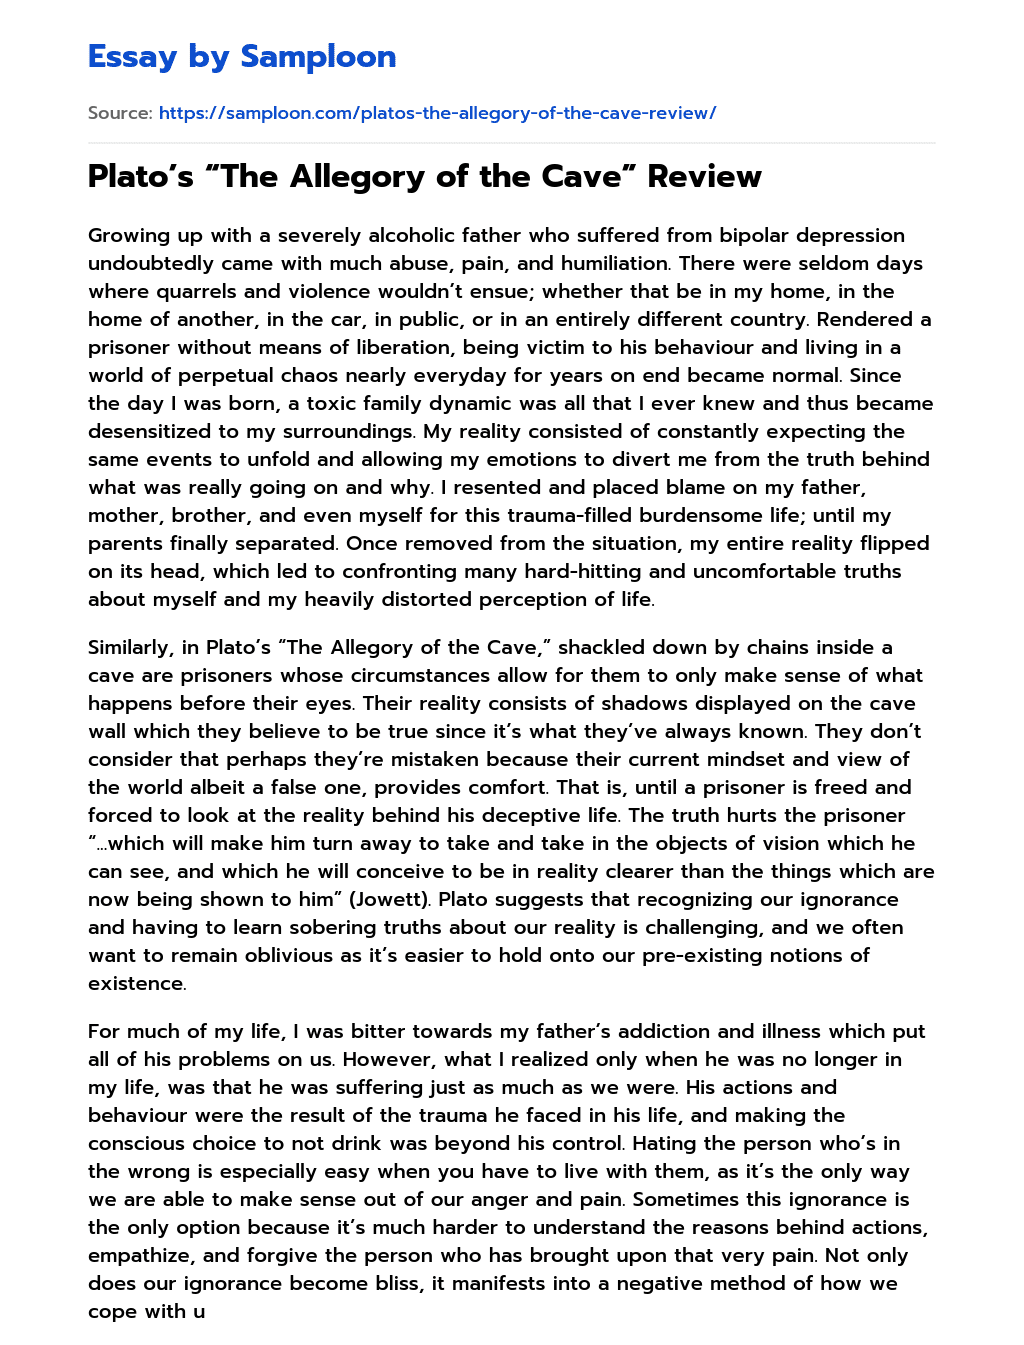 Plato’s “The Allegory of the Cave” Review essay